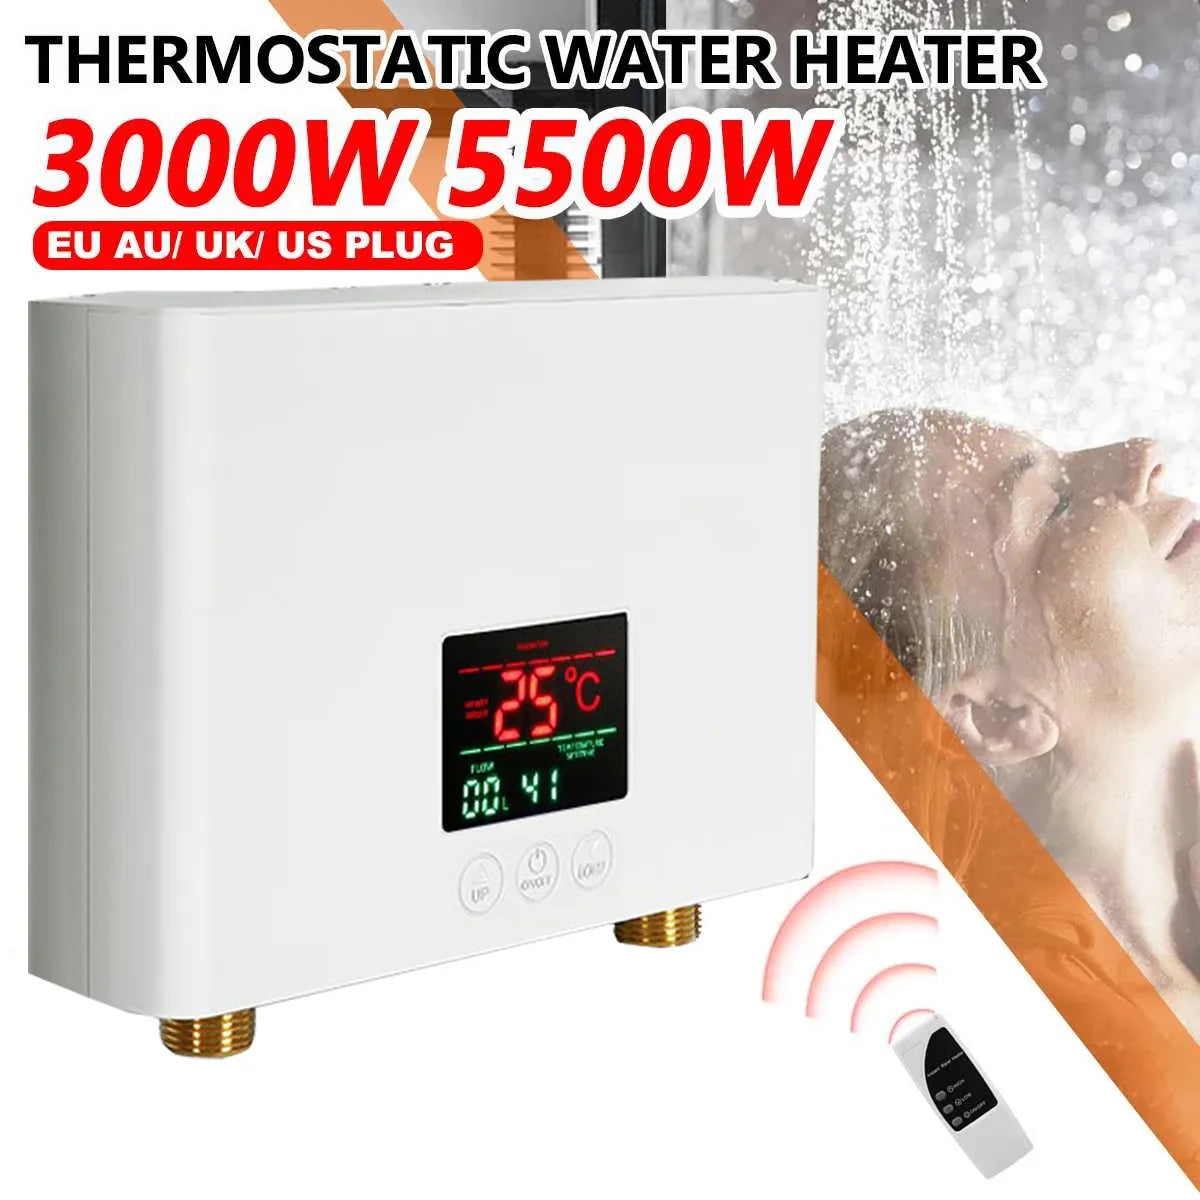 L5110V 220V Instant Water Heater Bathroom Kitchen Wall Mounted Electric Water Heater LCD Temperature Display with Remote Control